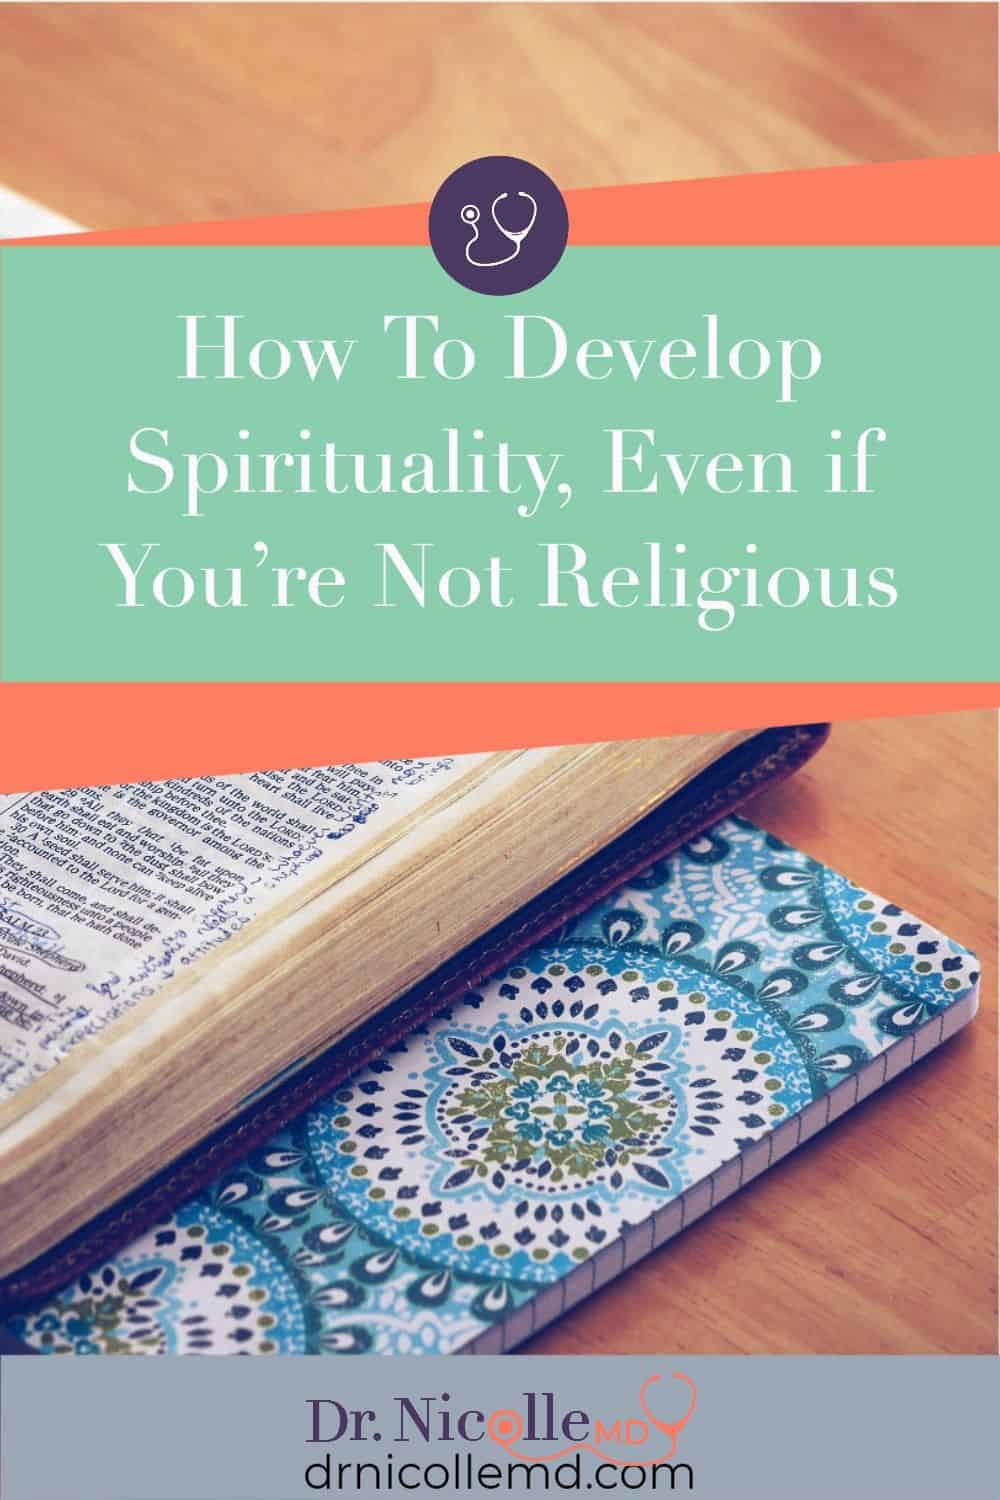 Developing Spirituality, Even if You’re Not Religious